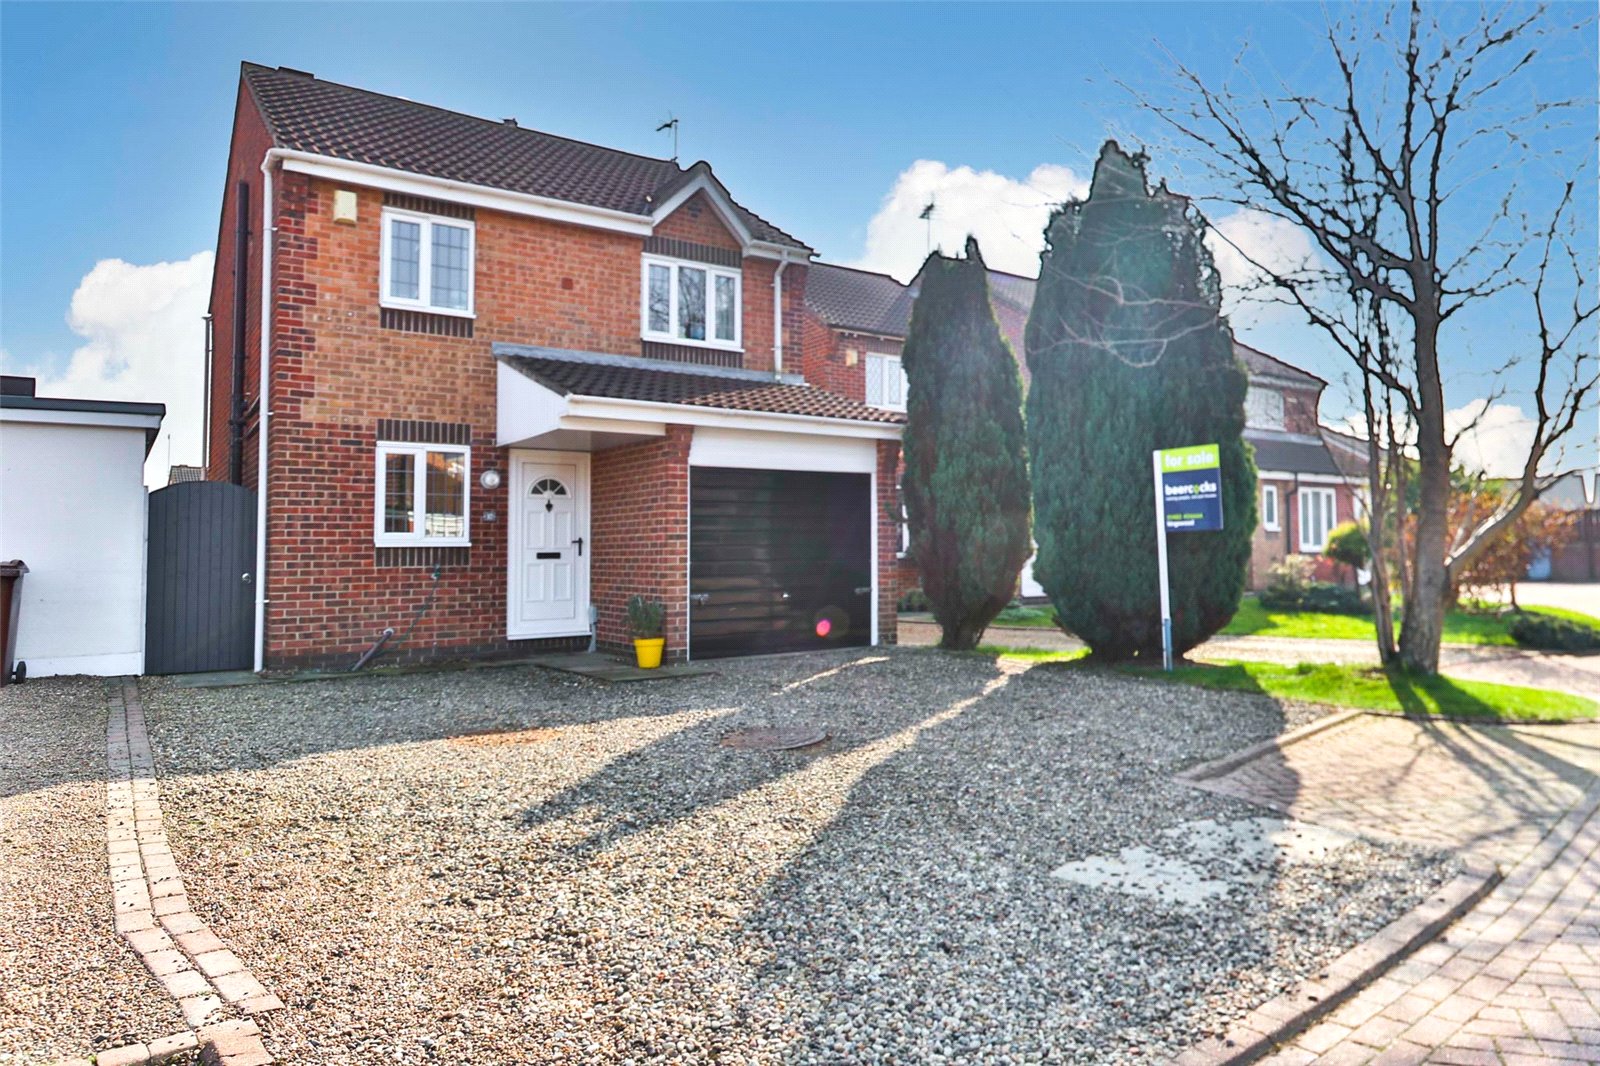 3 bed house for sale in Rainswood Close, Kingswood 0